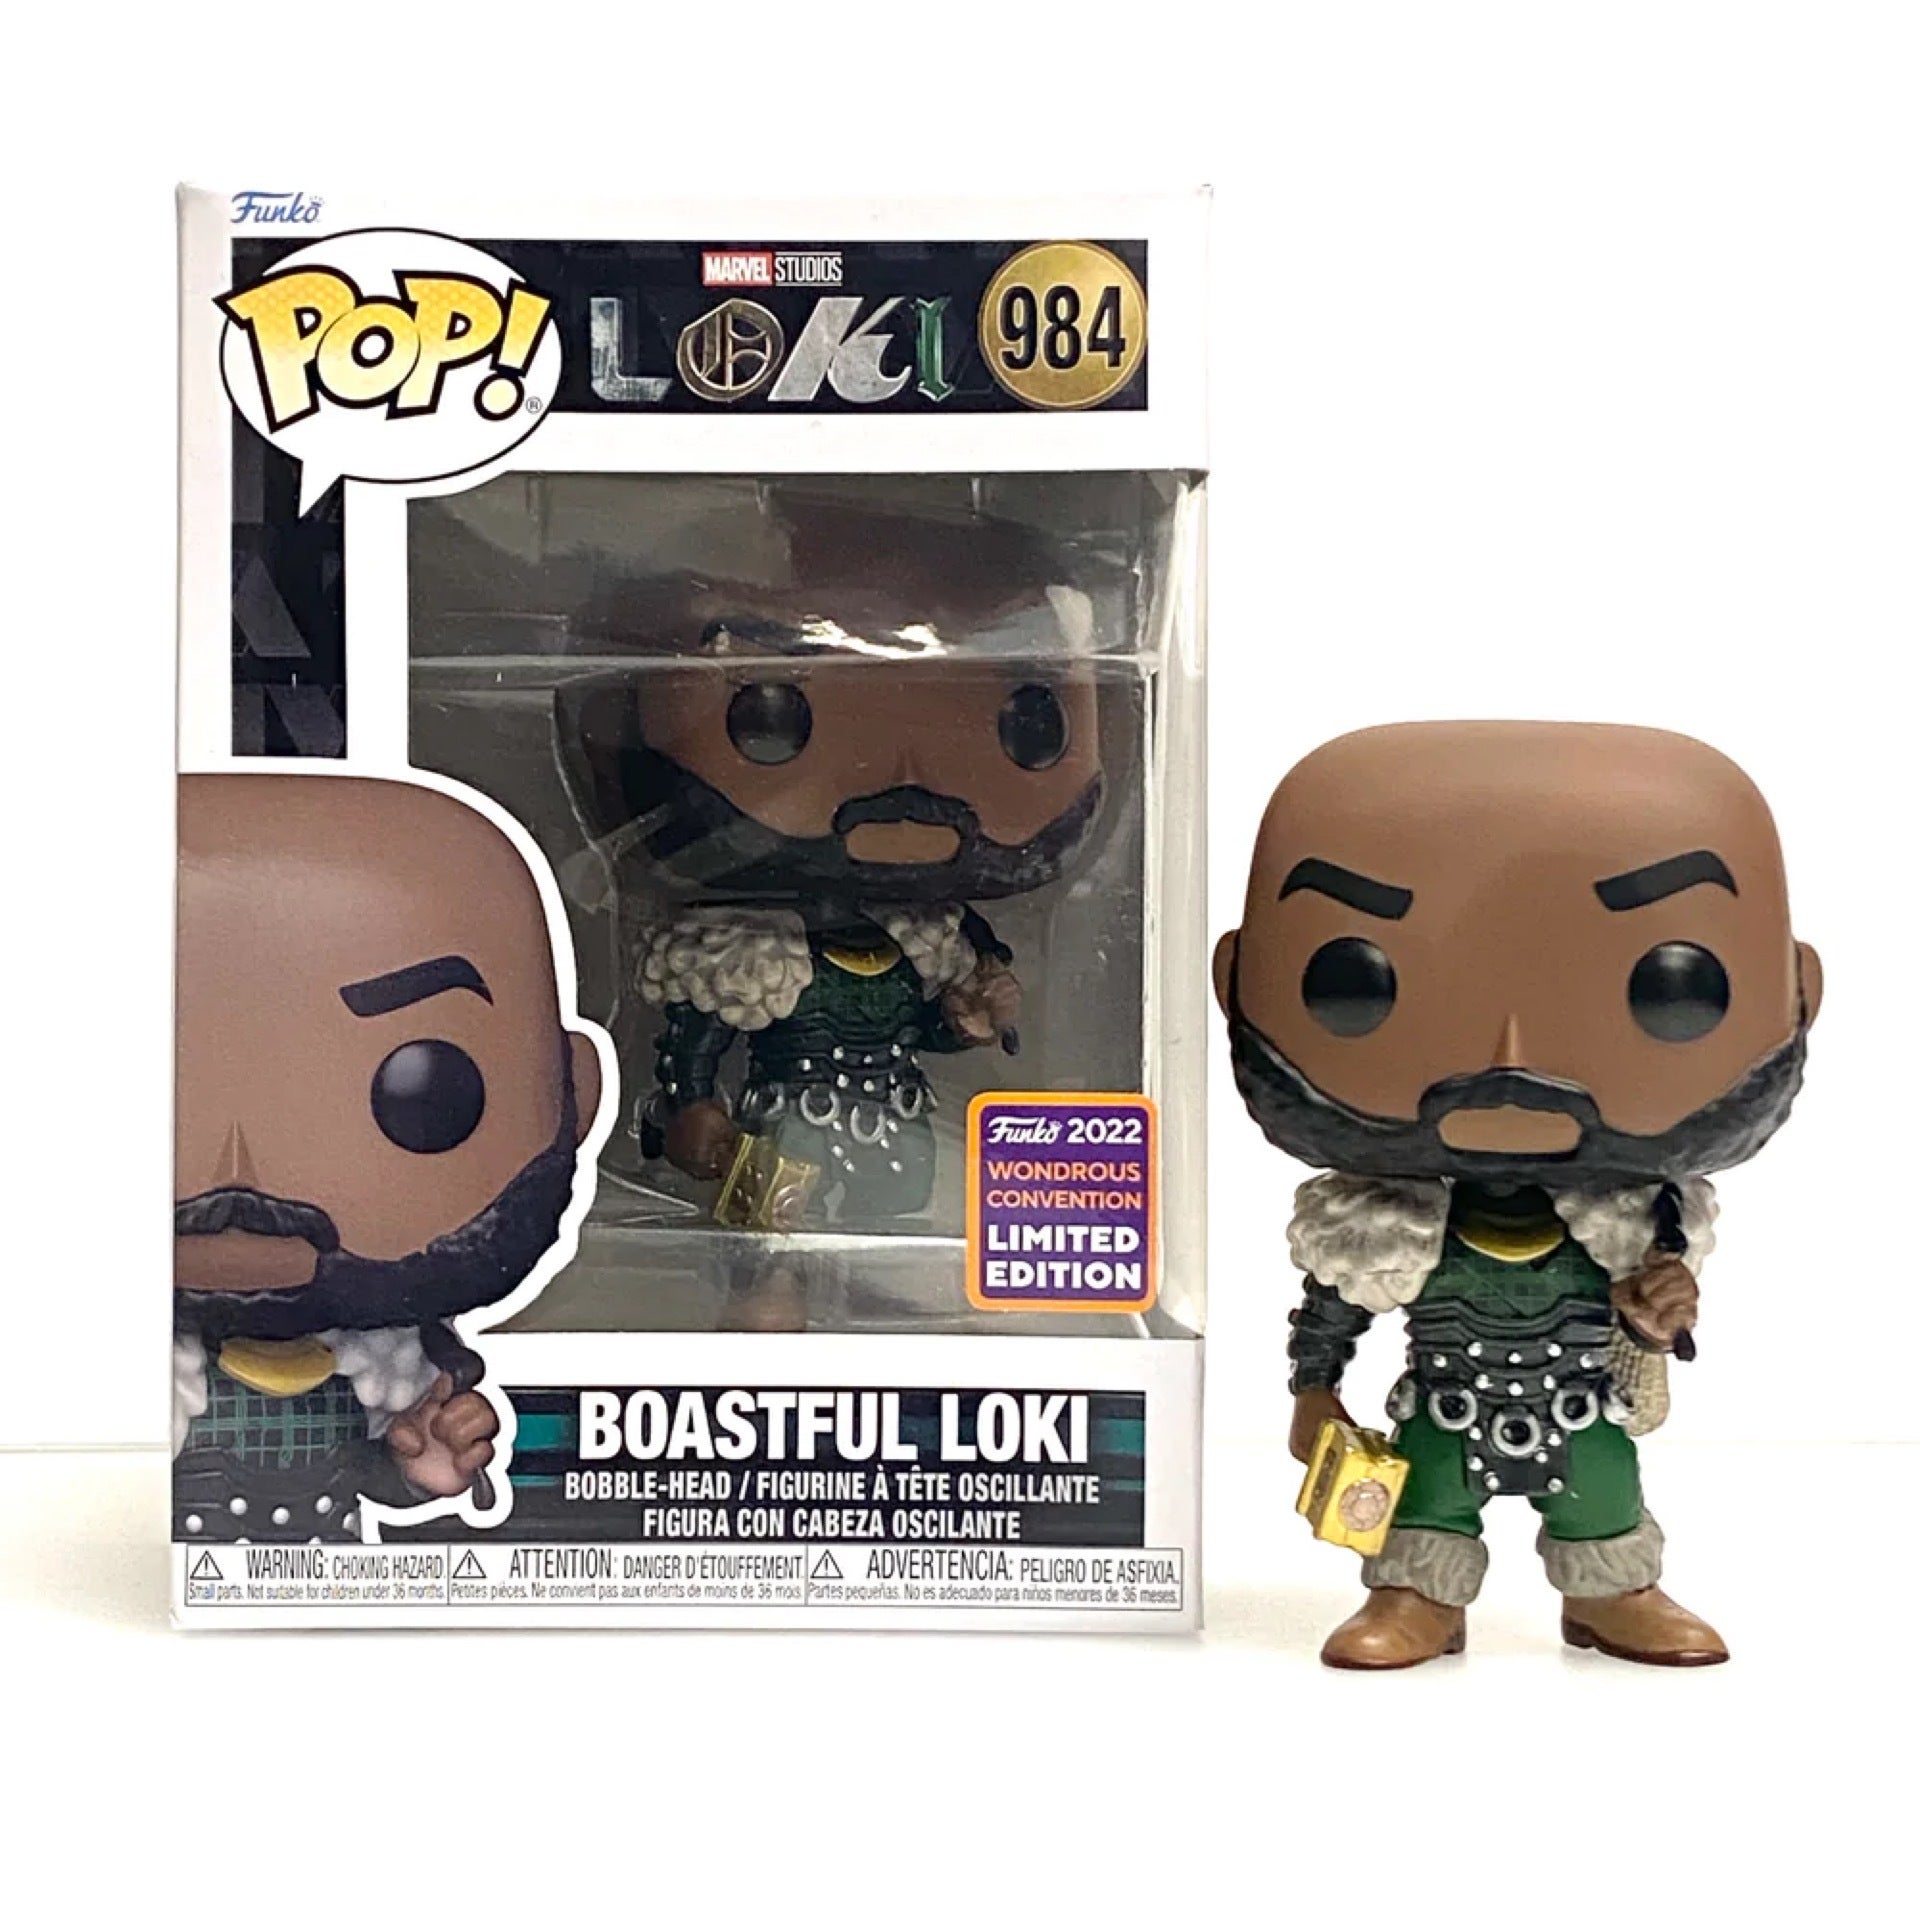 Funko Pop! Marvel Loki #984 Boastful Loki Exclusive Vinyl Figure  BobaKhan  Toys - Vintage and New Action Figures, Toys and Collectibles!